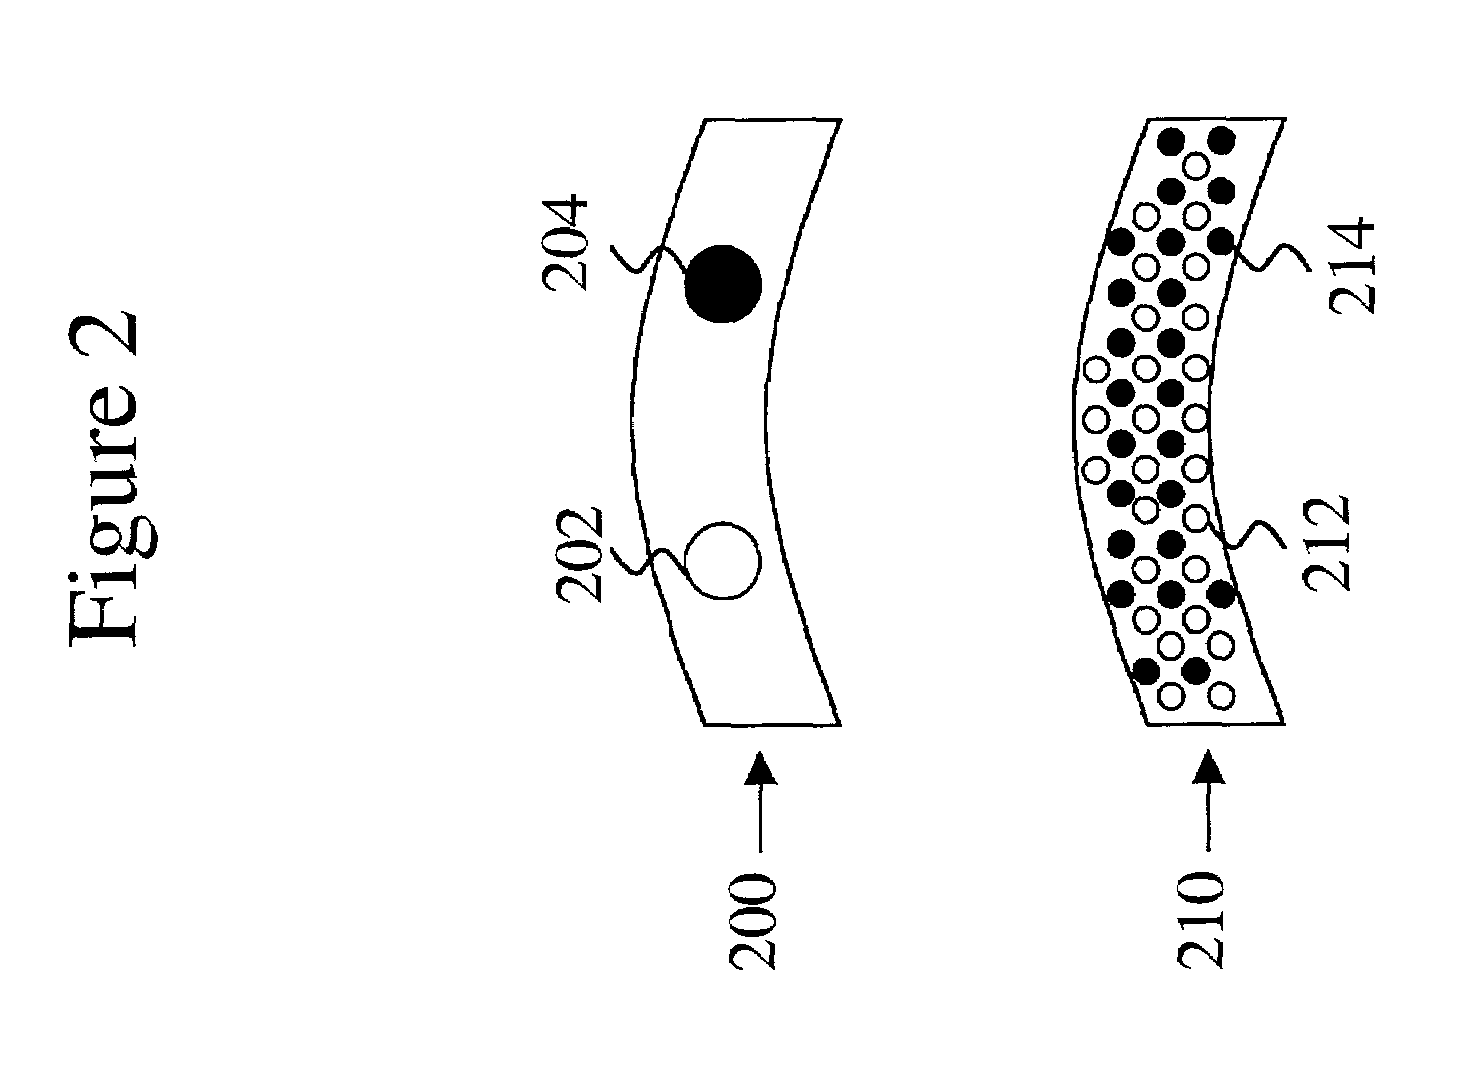 Temperature controlled heating device and method to heat a selected area of a biological body